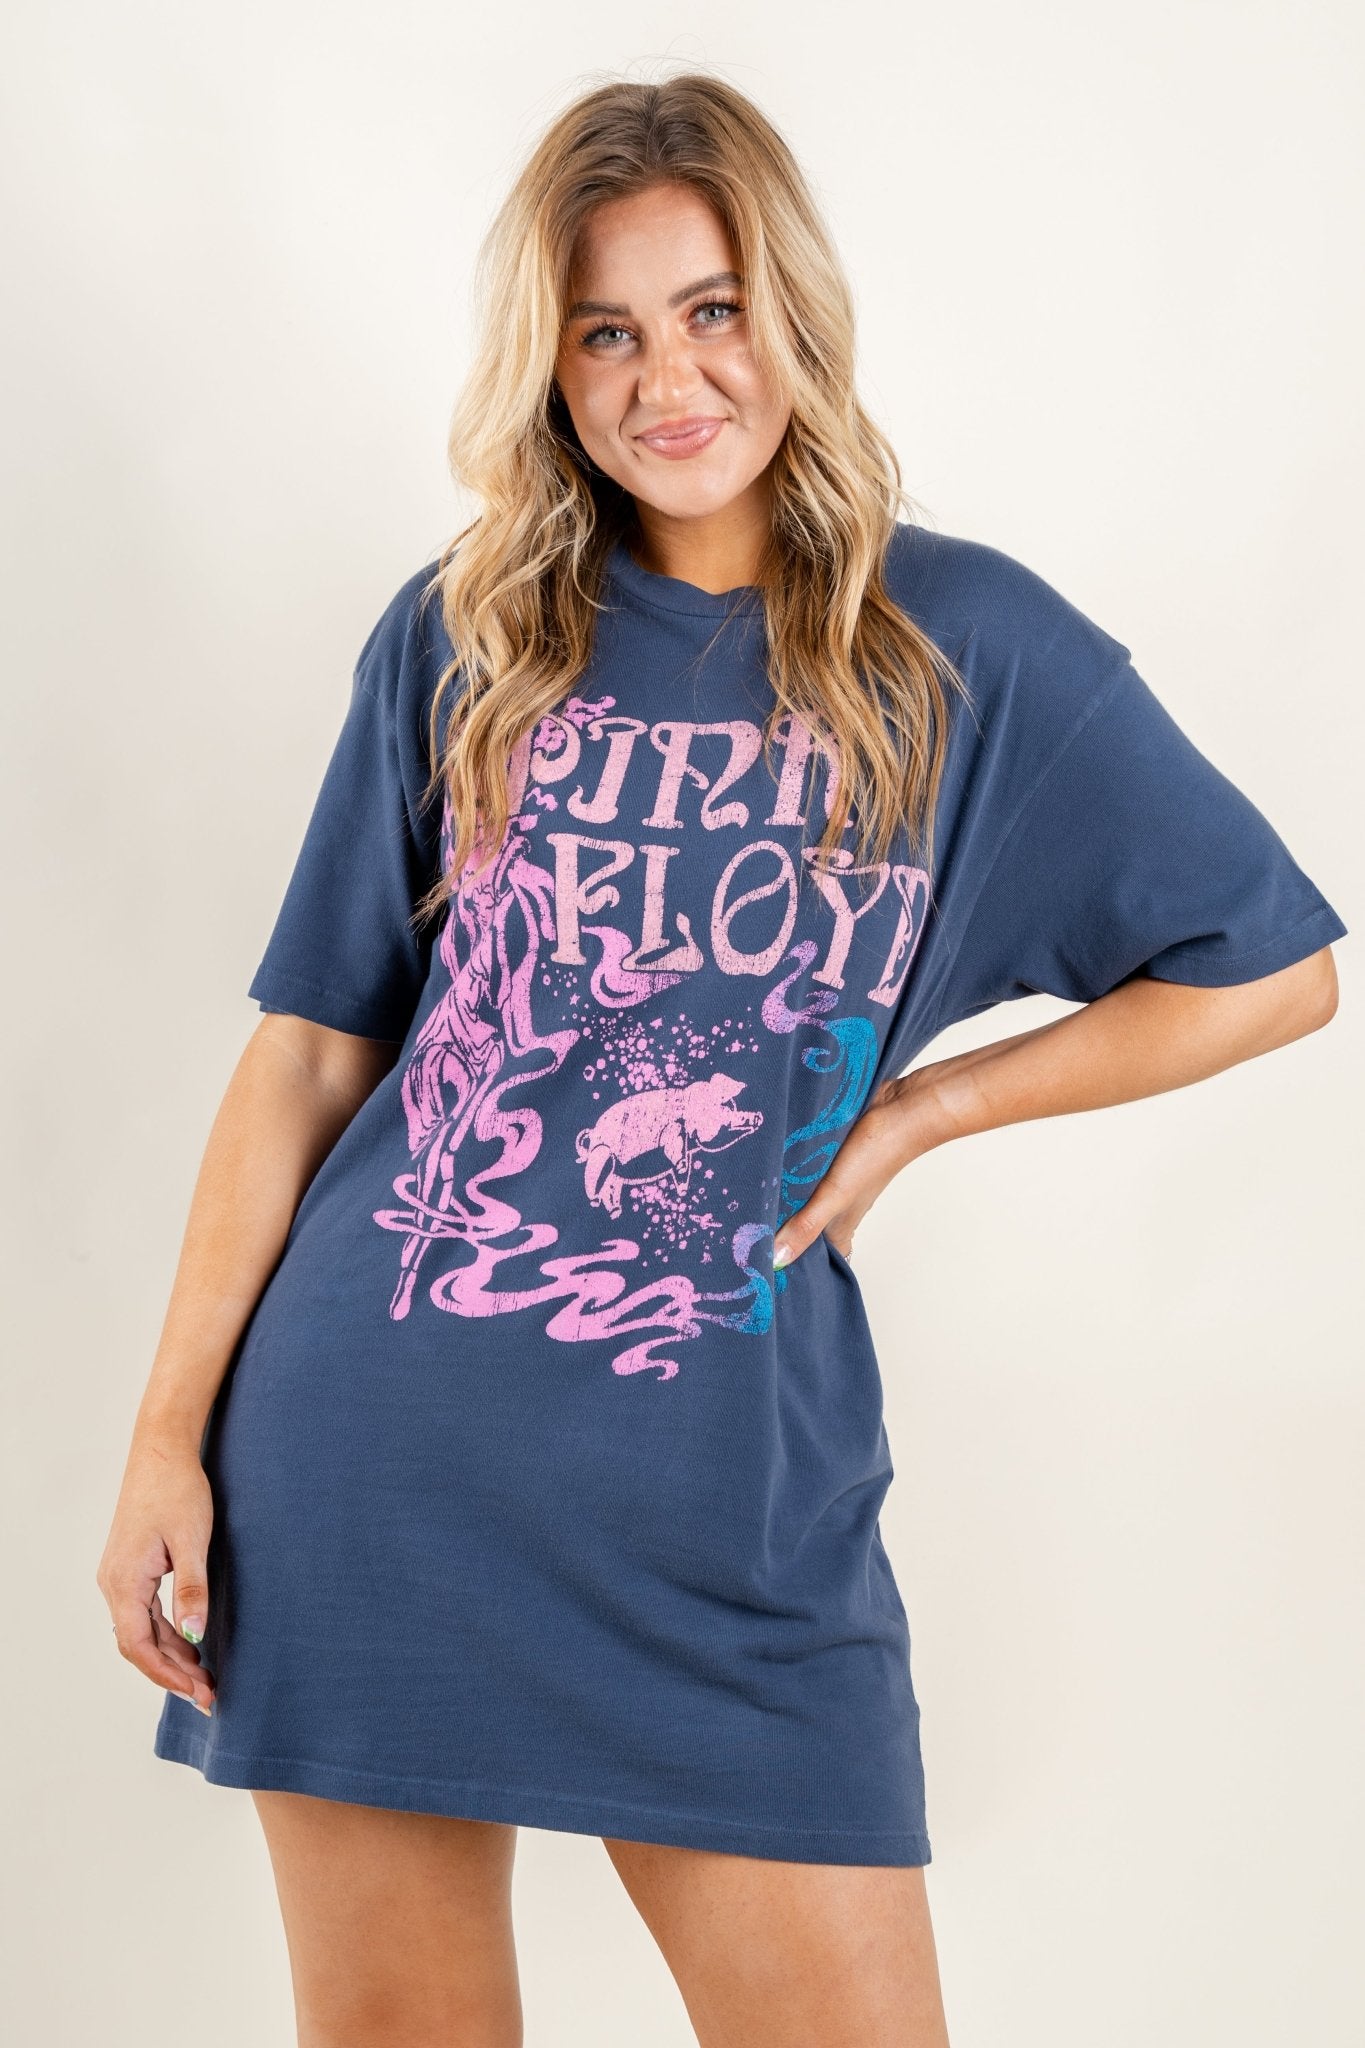 DayDreamer Pink Floyd t-shirt dress navy - Trendy Band T-Shirts and Sweatshirts at Lush Fashion Lounge Boutique in Oklahoma City